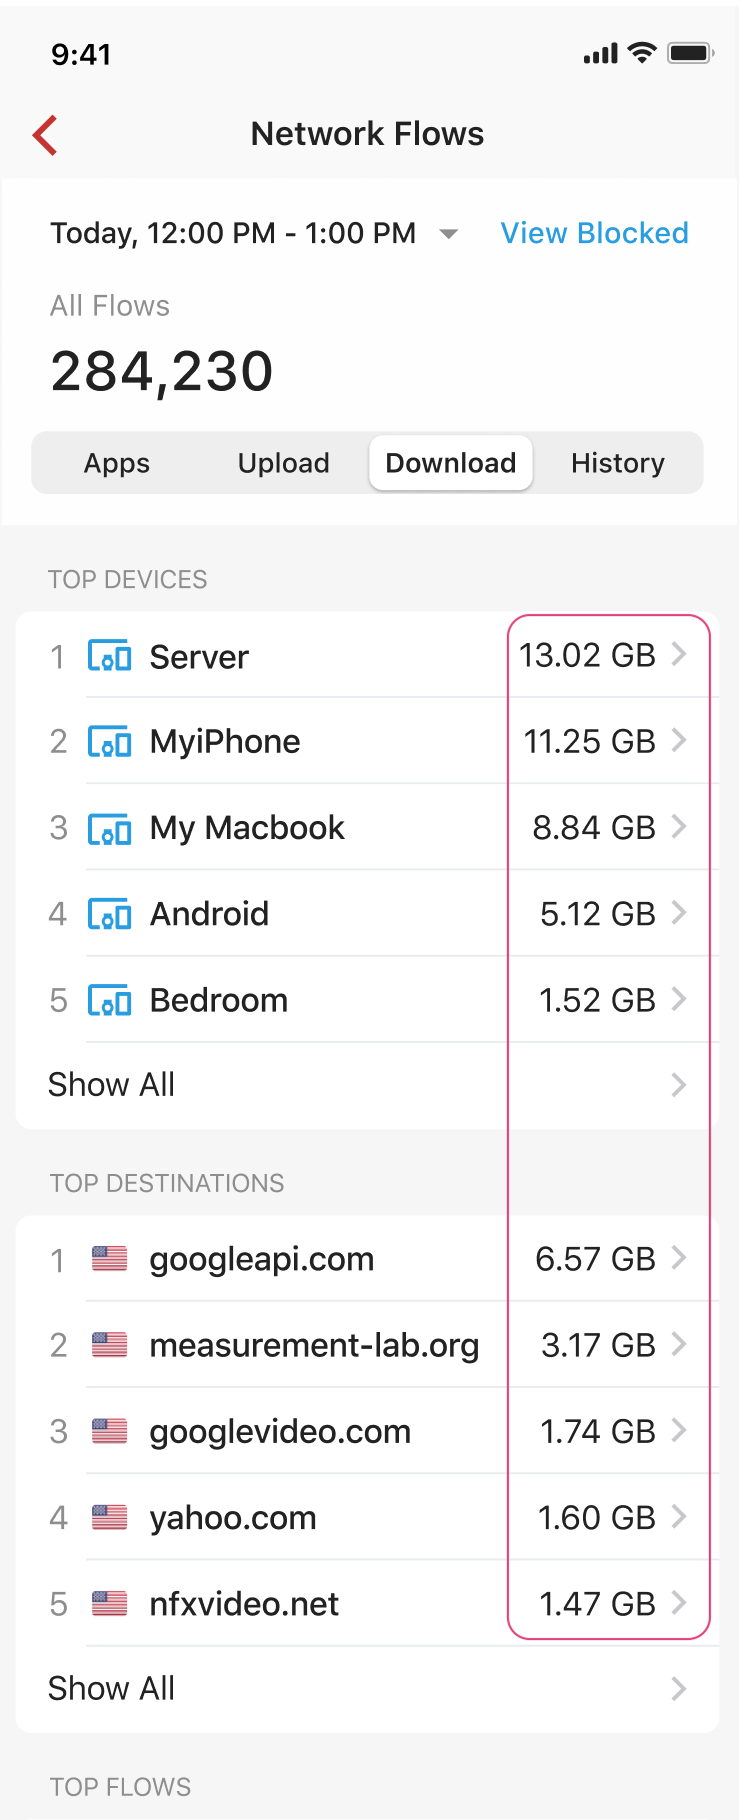 Use Firewalla Upload and Download feature to see top data usage by devices or destinations